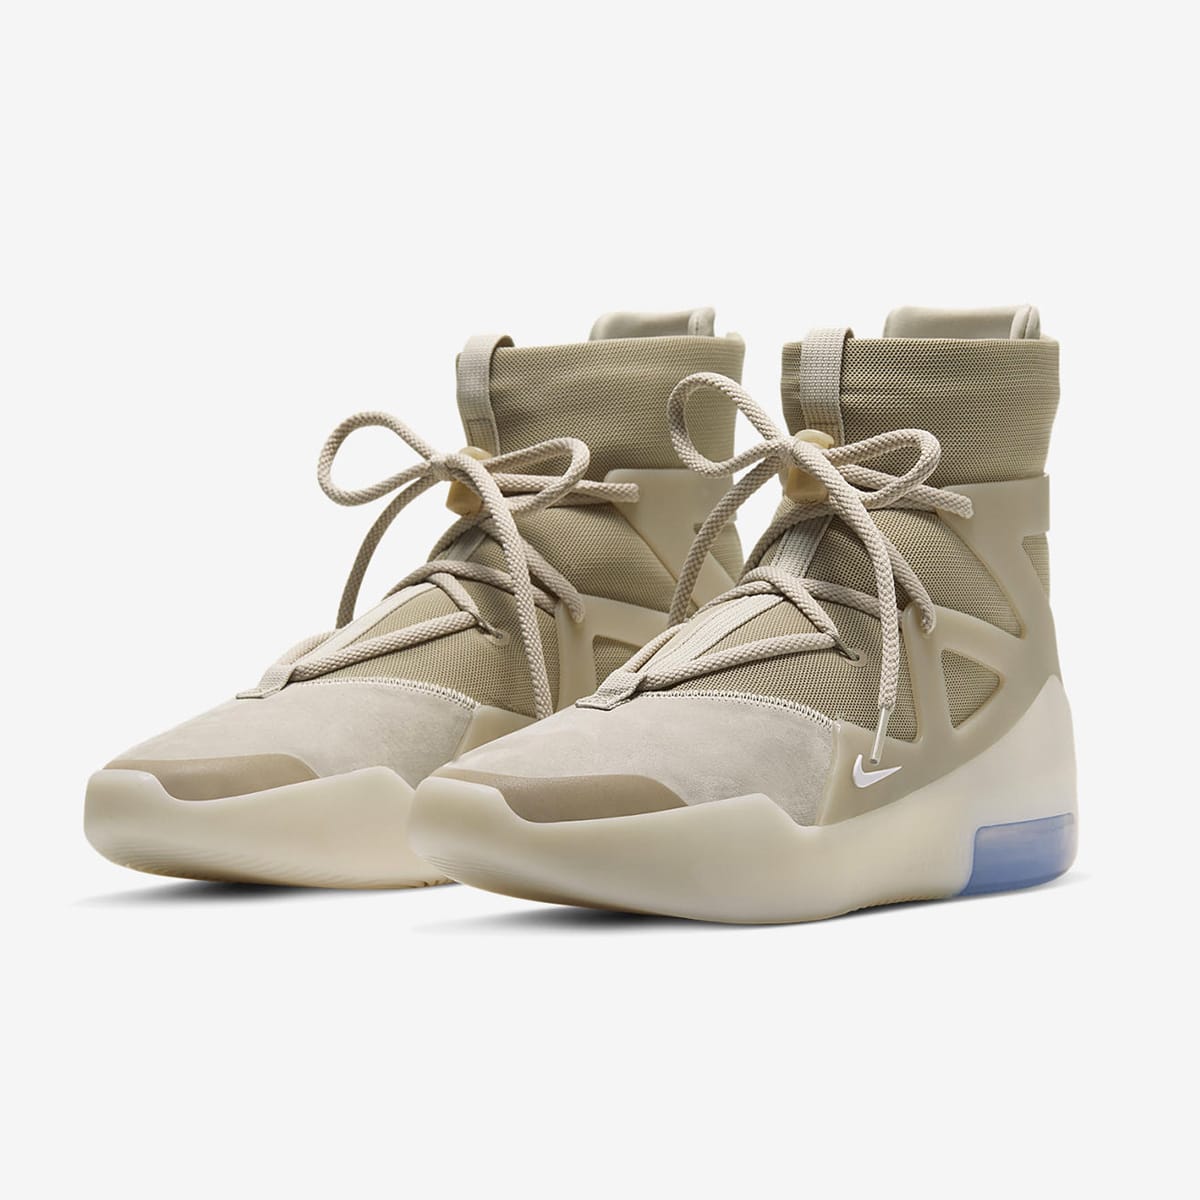 Nike Air Fear of God 1 (String, Oatmeal & Pale Ivory) | END. Launches